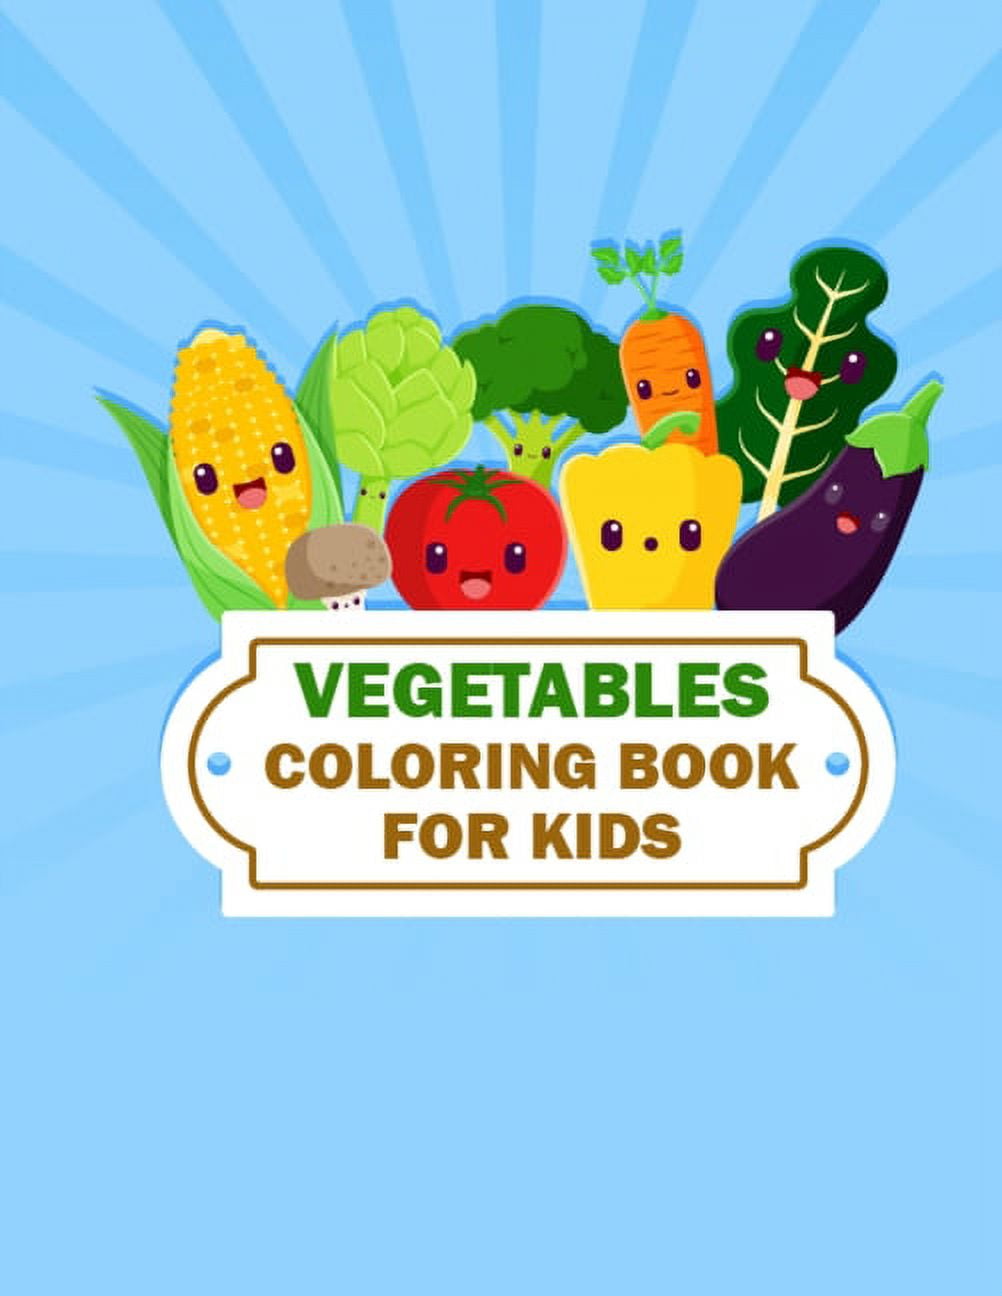 vegetables drawing for colouring